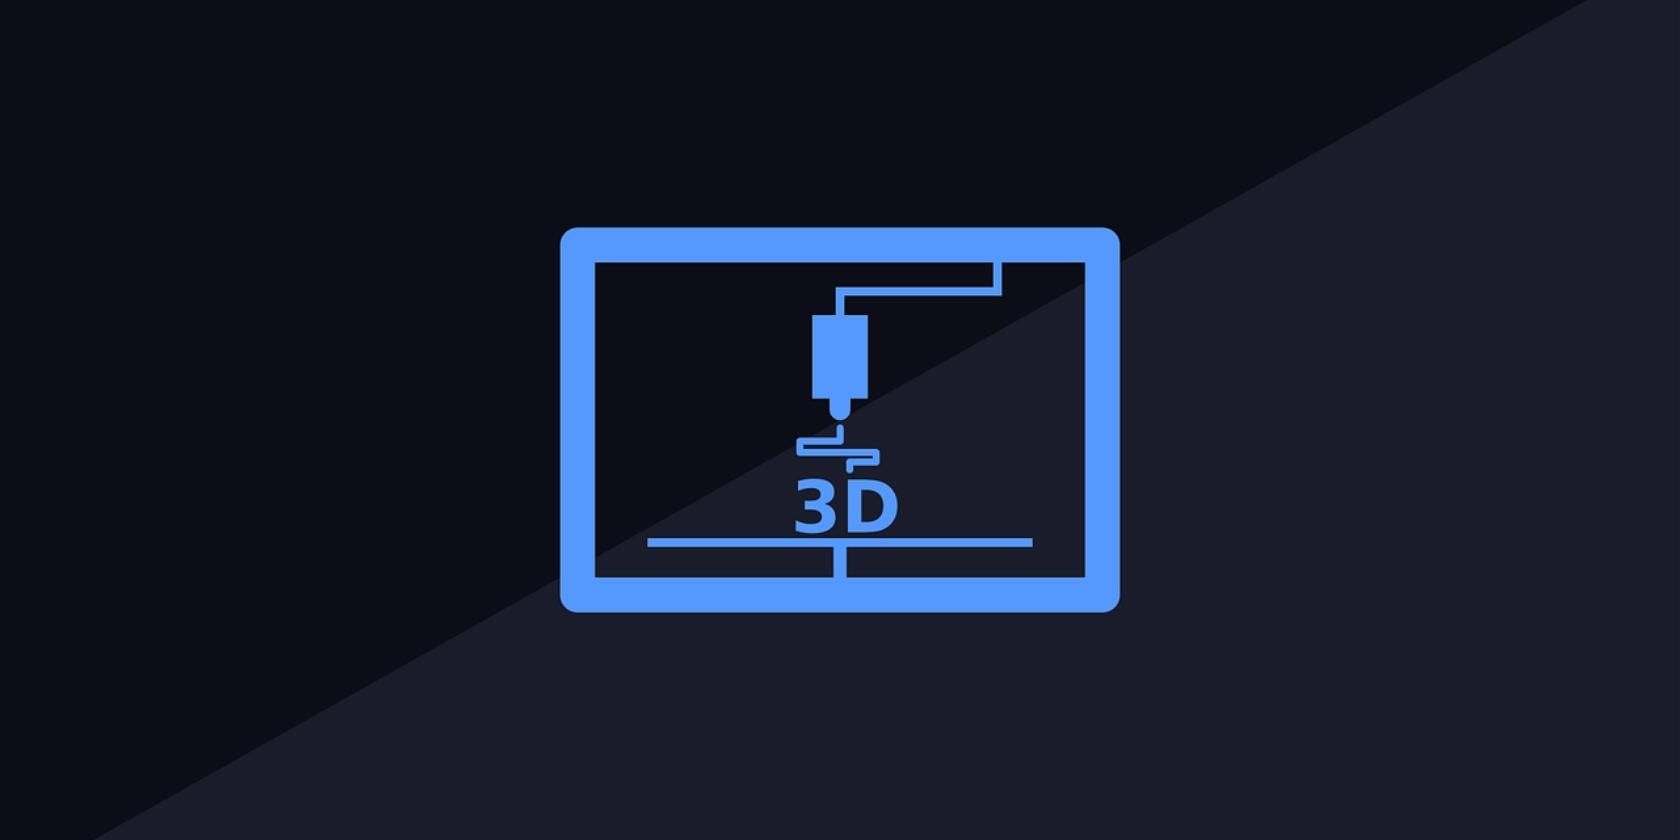 An illustration of 3D printing